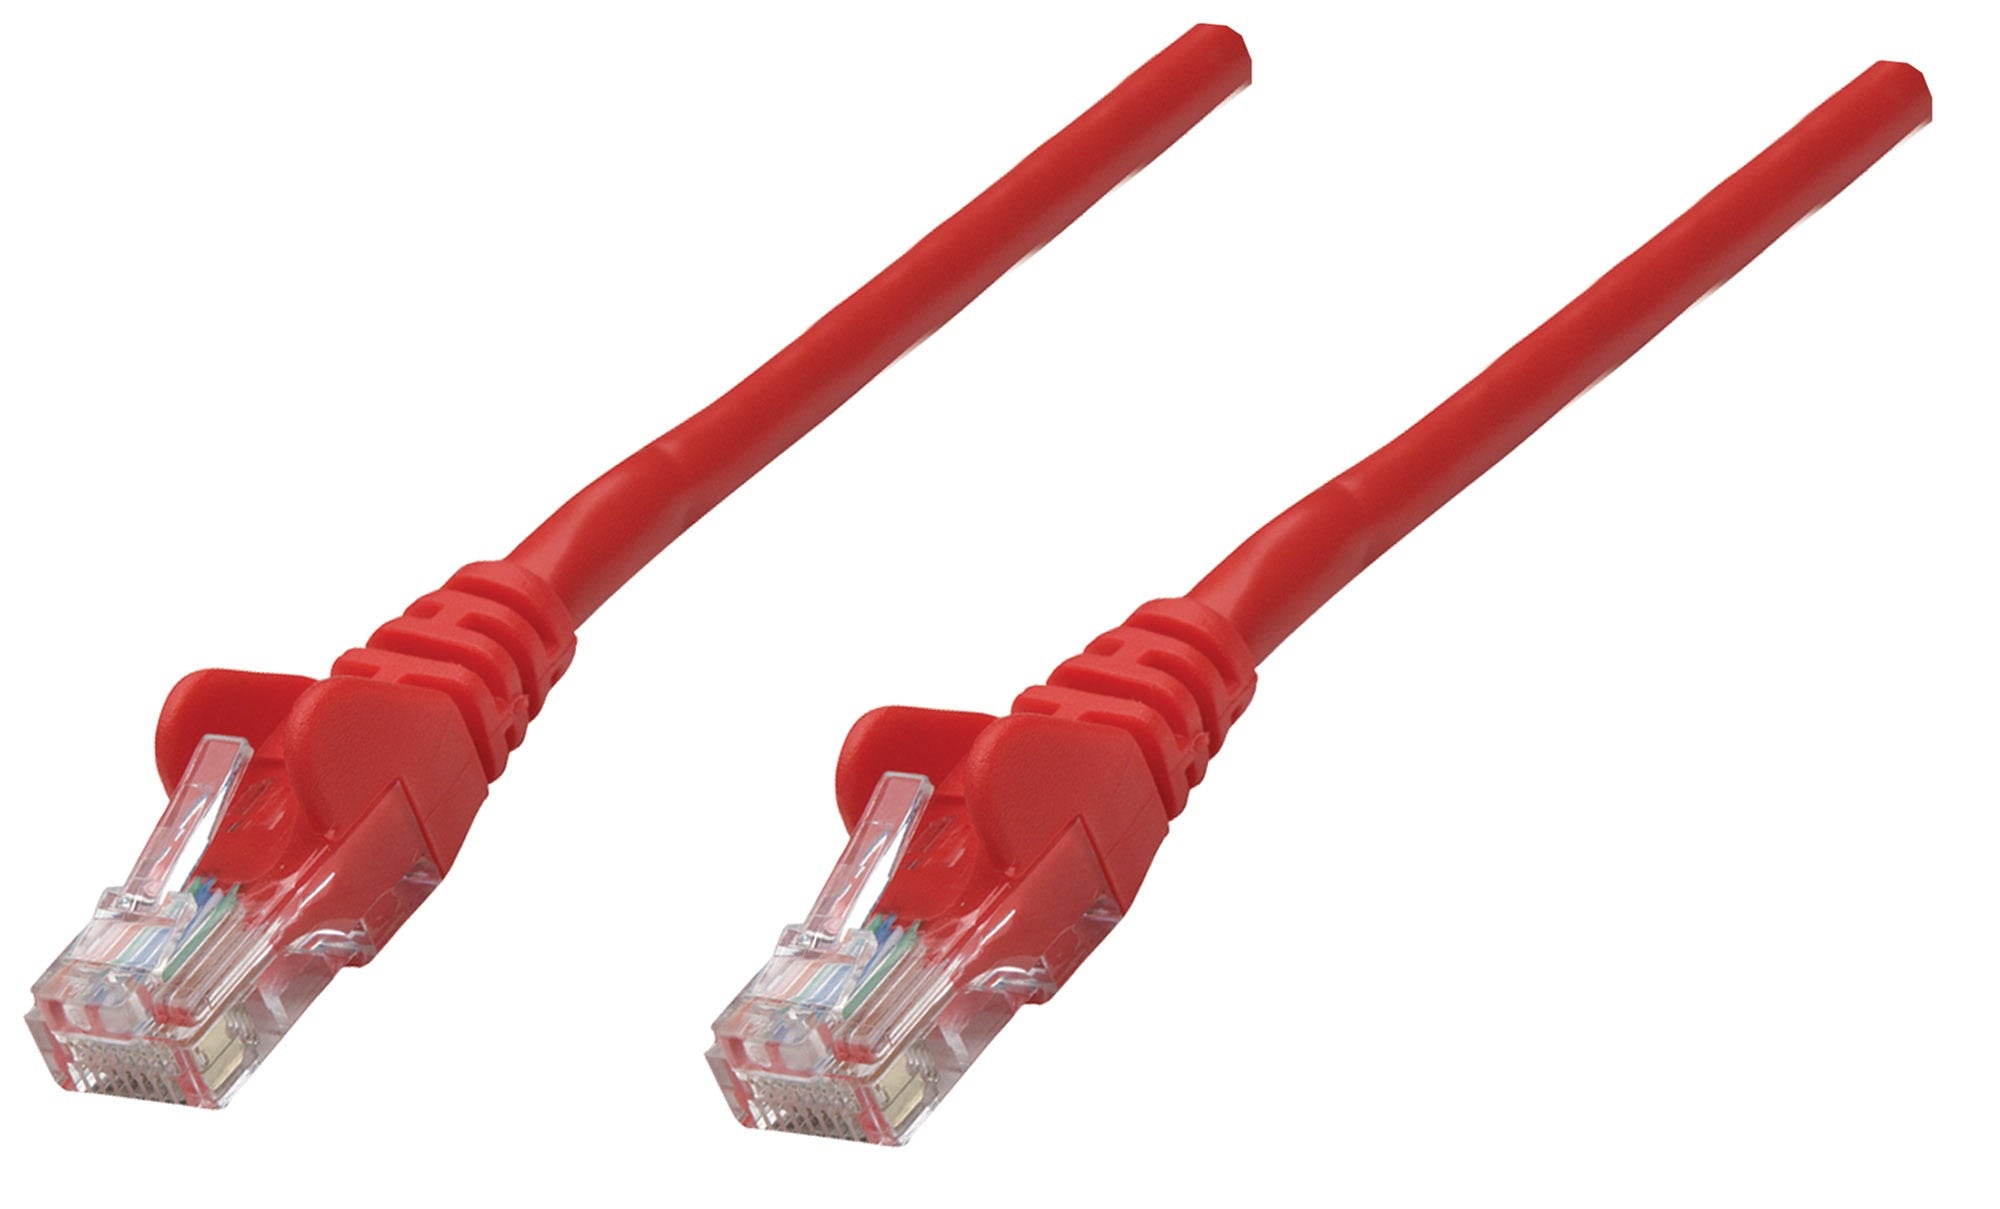 Intellinet Network Patch Cable, Cat6, 5m, Red, Copper, U/UTP, PVC, RJ45, Gold Plated Contacts, Snagless, Booted, Lifetime Warranty, Polybag